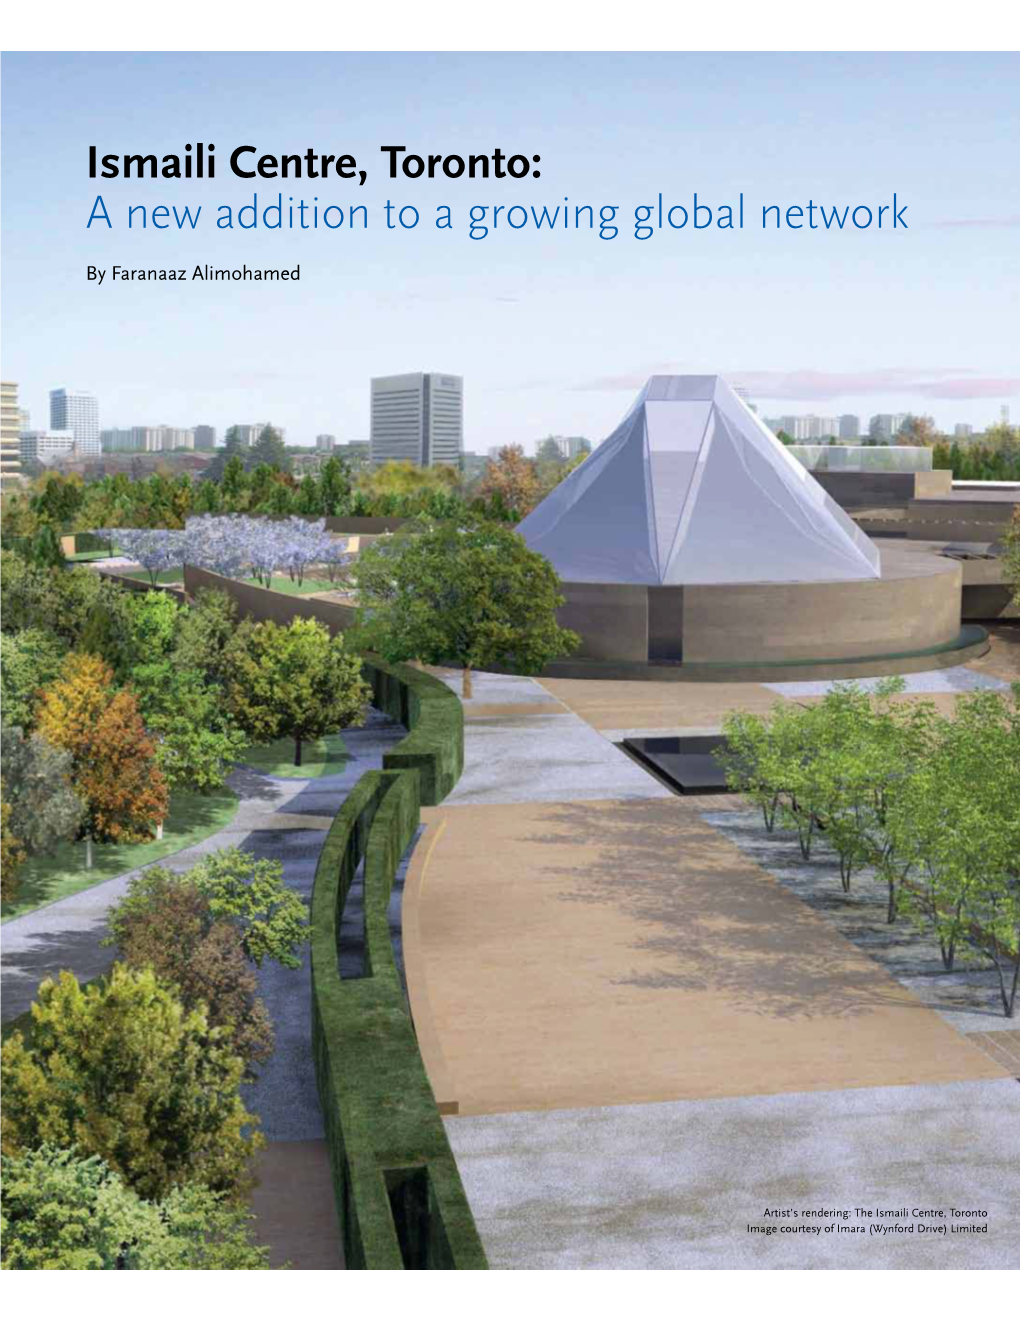 Ismaili Centre, Toronto: a New Addition to a Growing Global Network